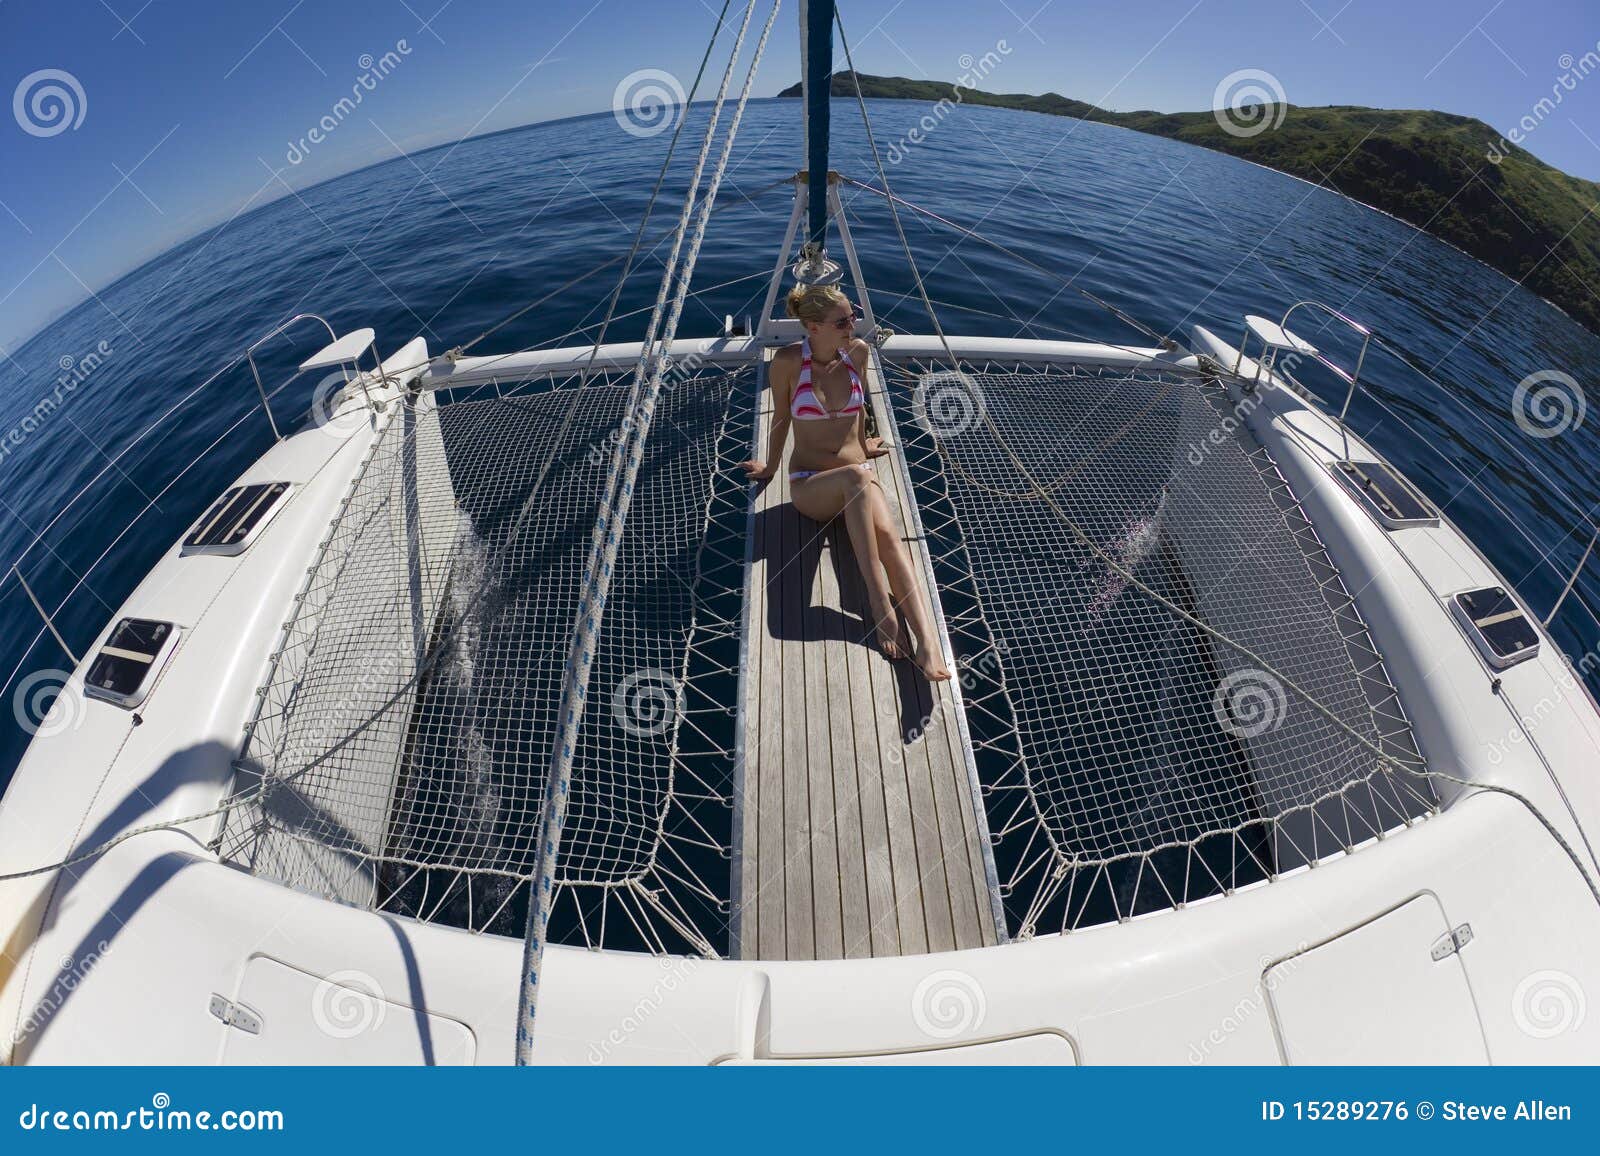 Girl Relaxing On A Catamaran - South Pacific Stock Photo 